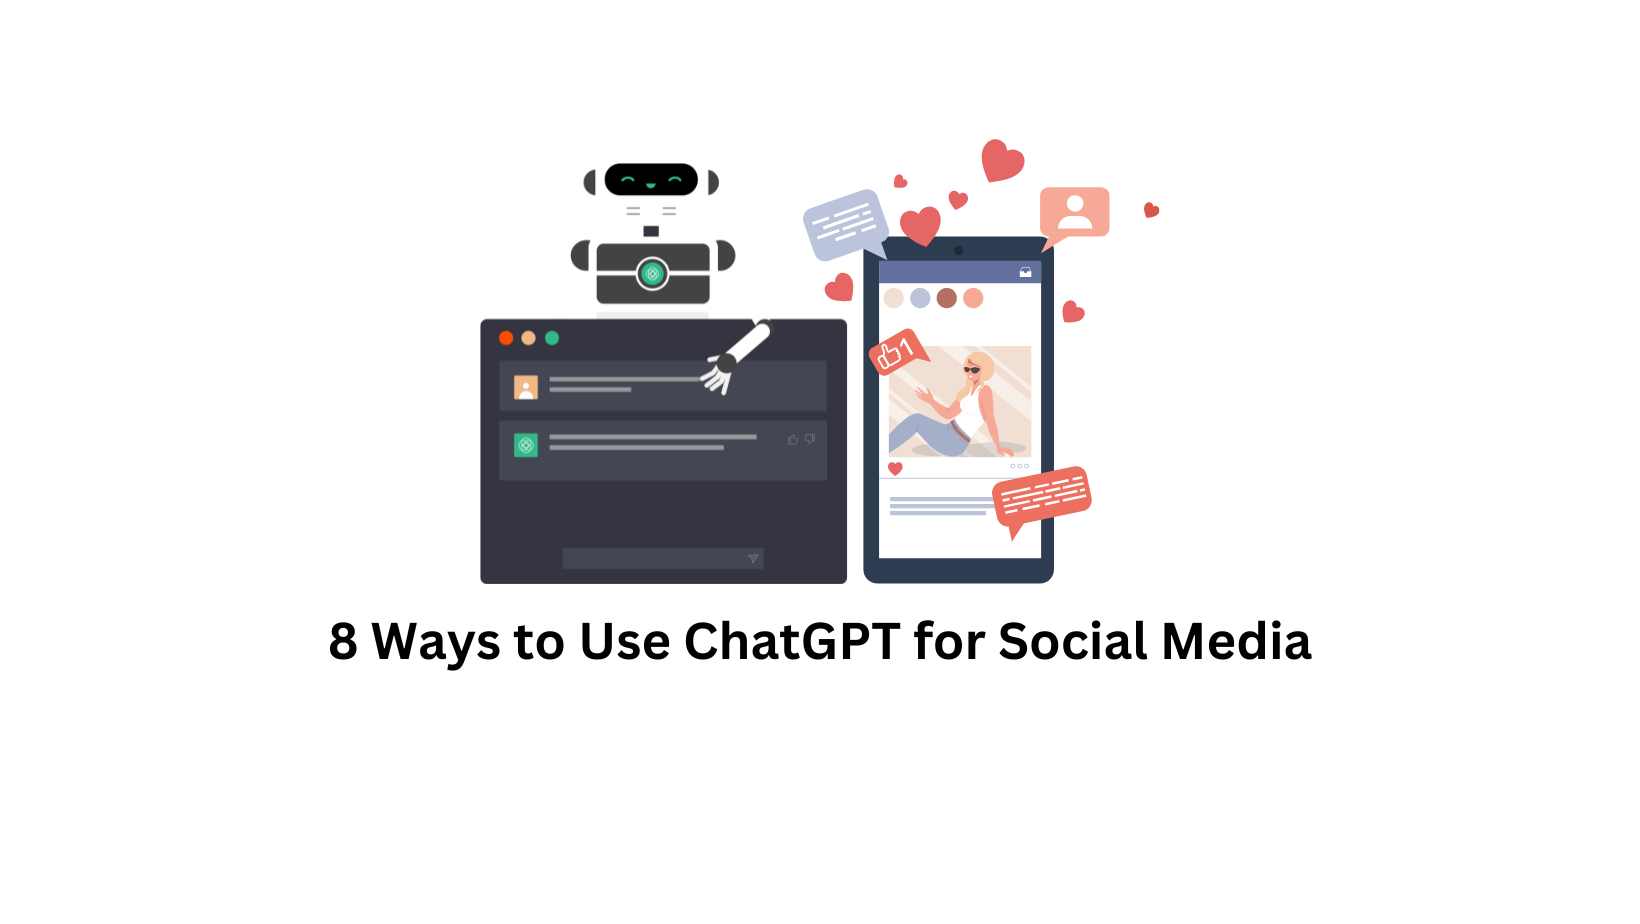 8 Ways to Use ChatGPT for Social Media